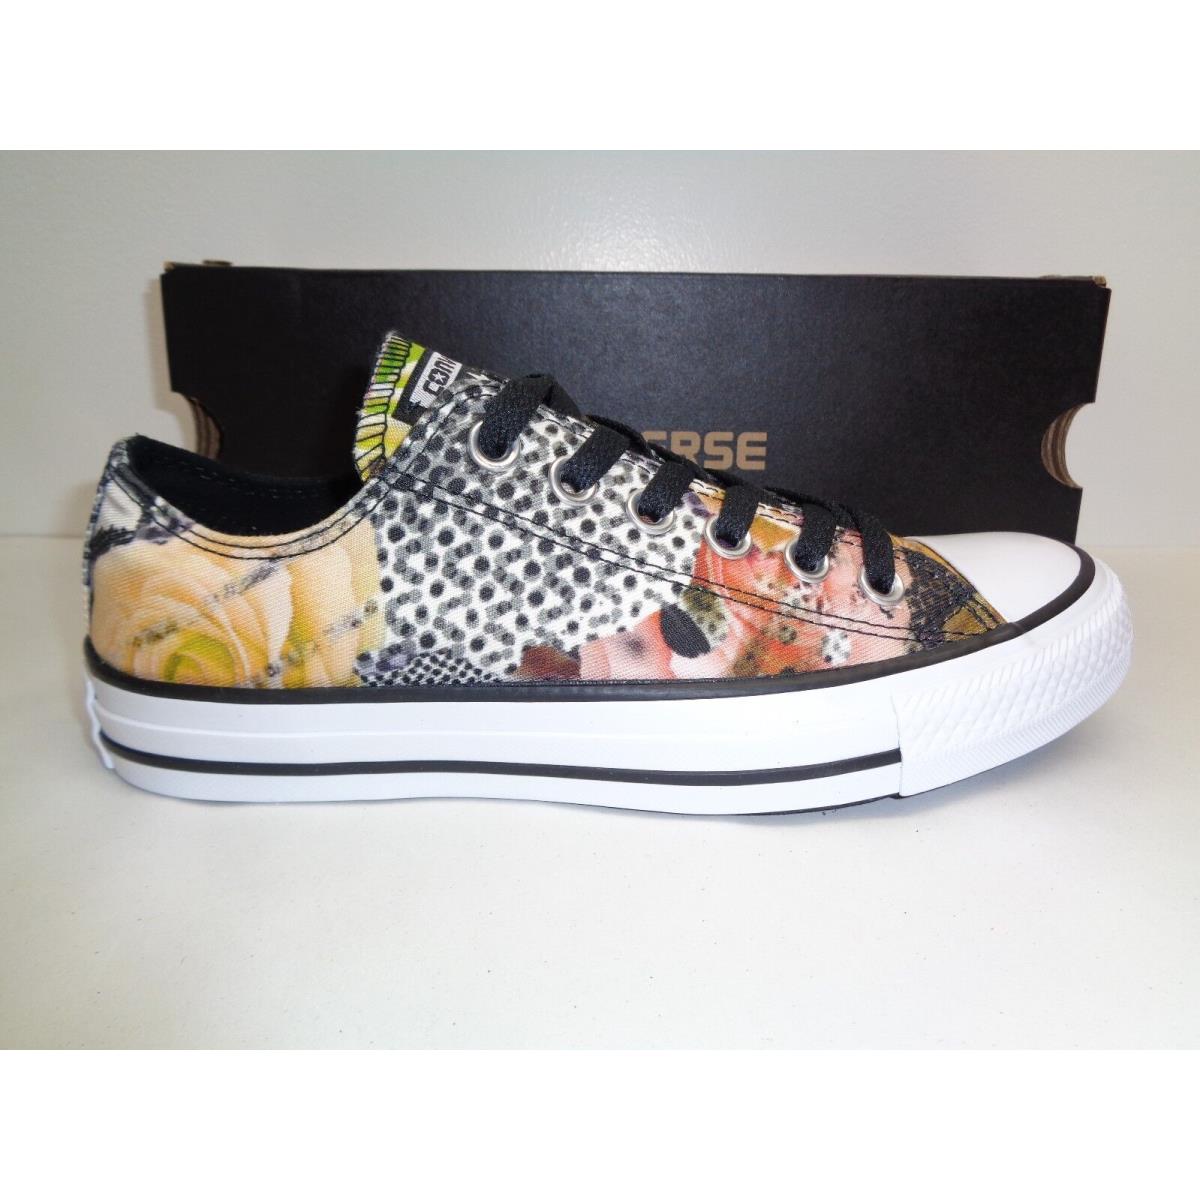 Converse Size 6.5 Digital Floral OX Canvas Fashion Sneakers Womens Shoes